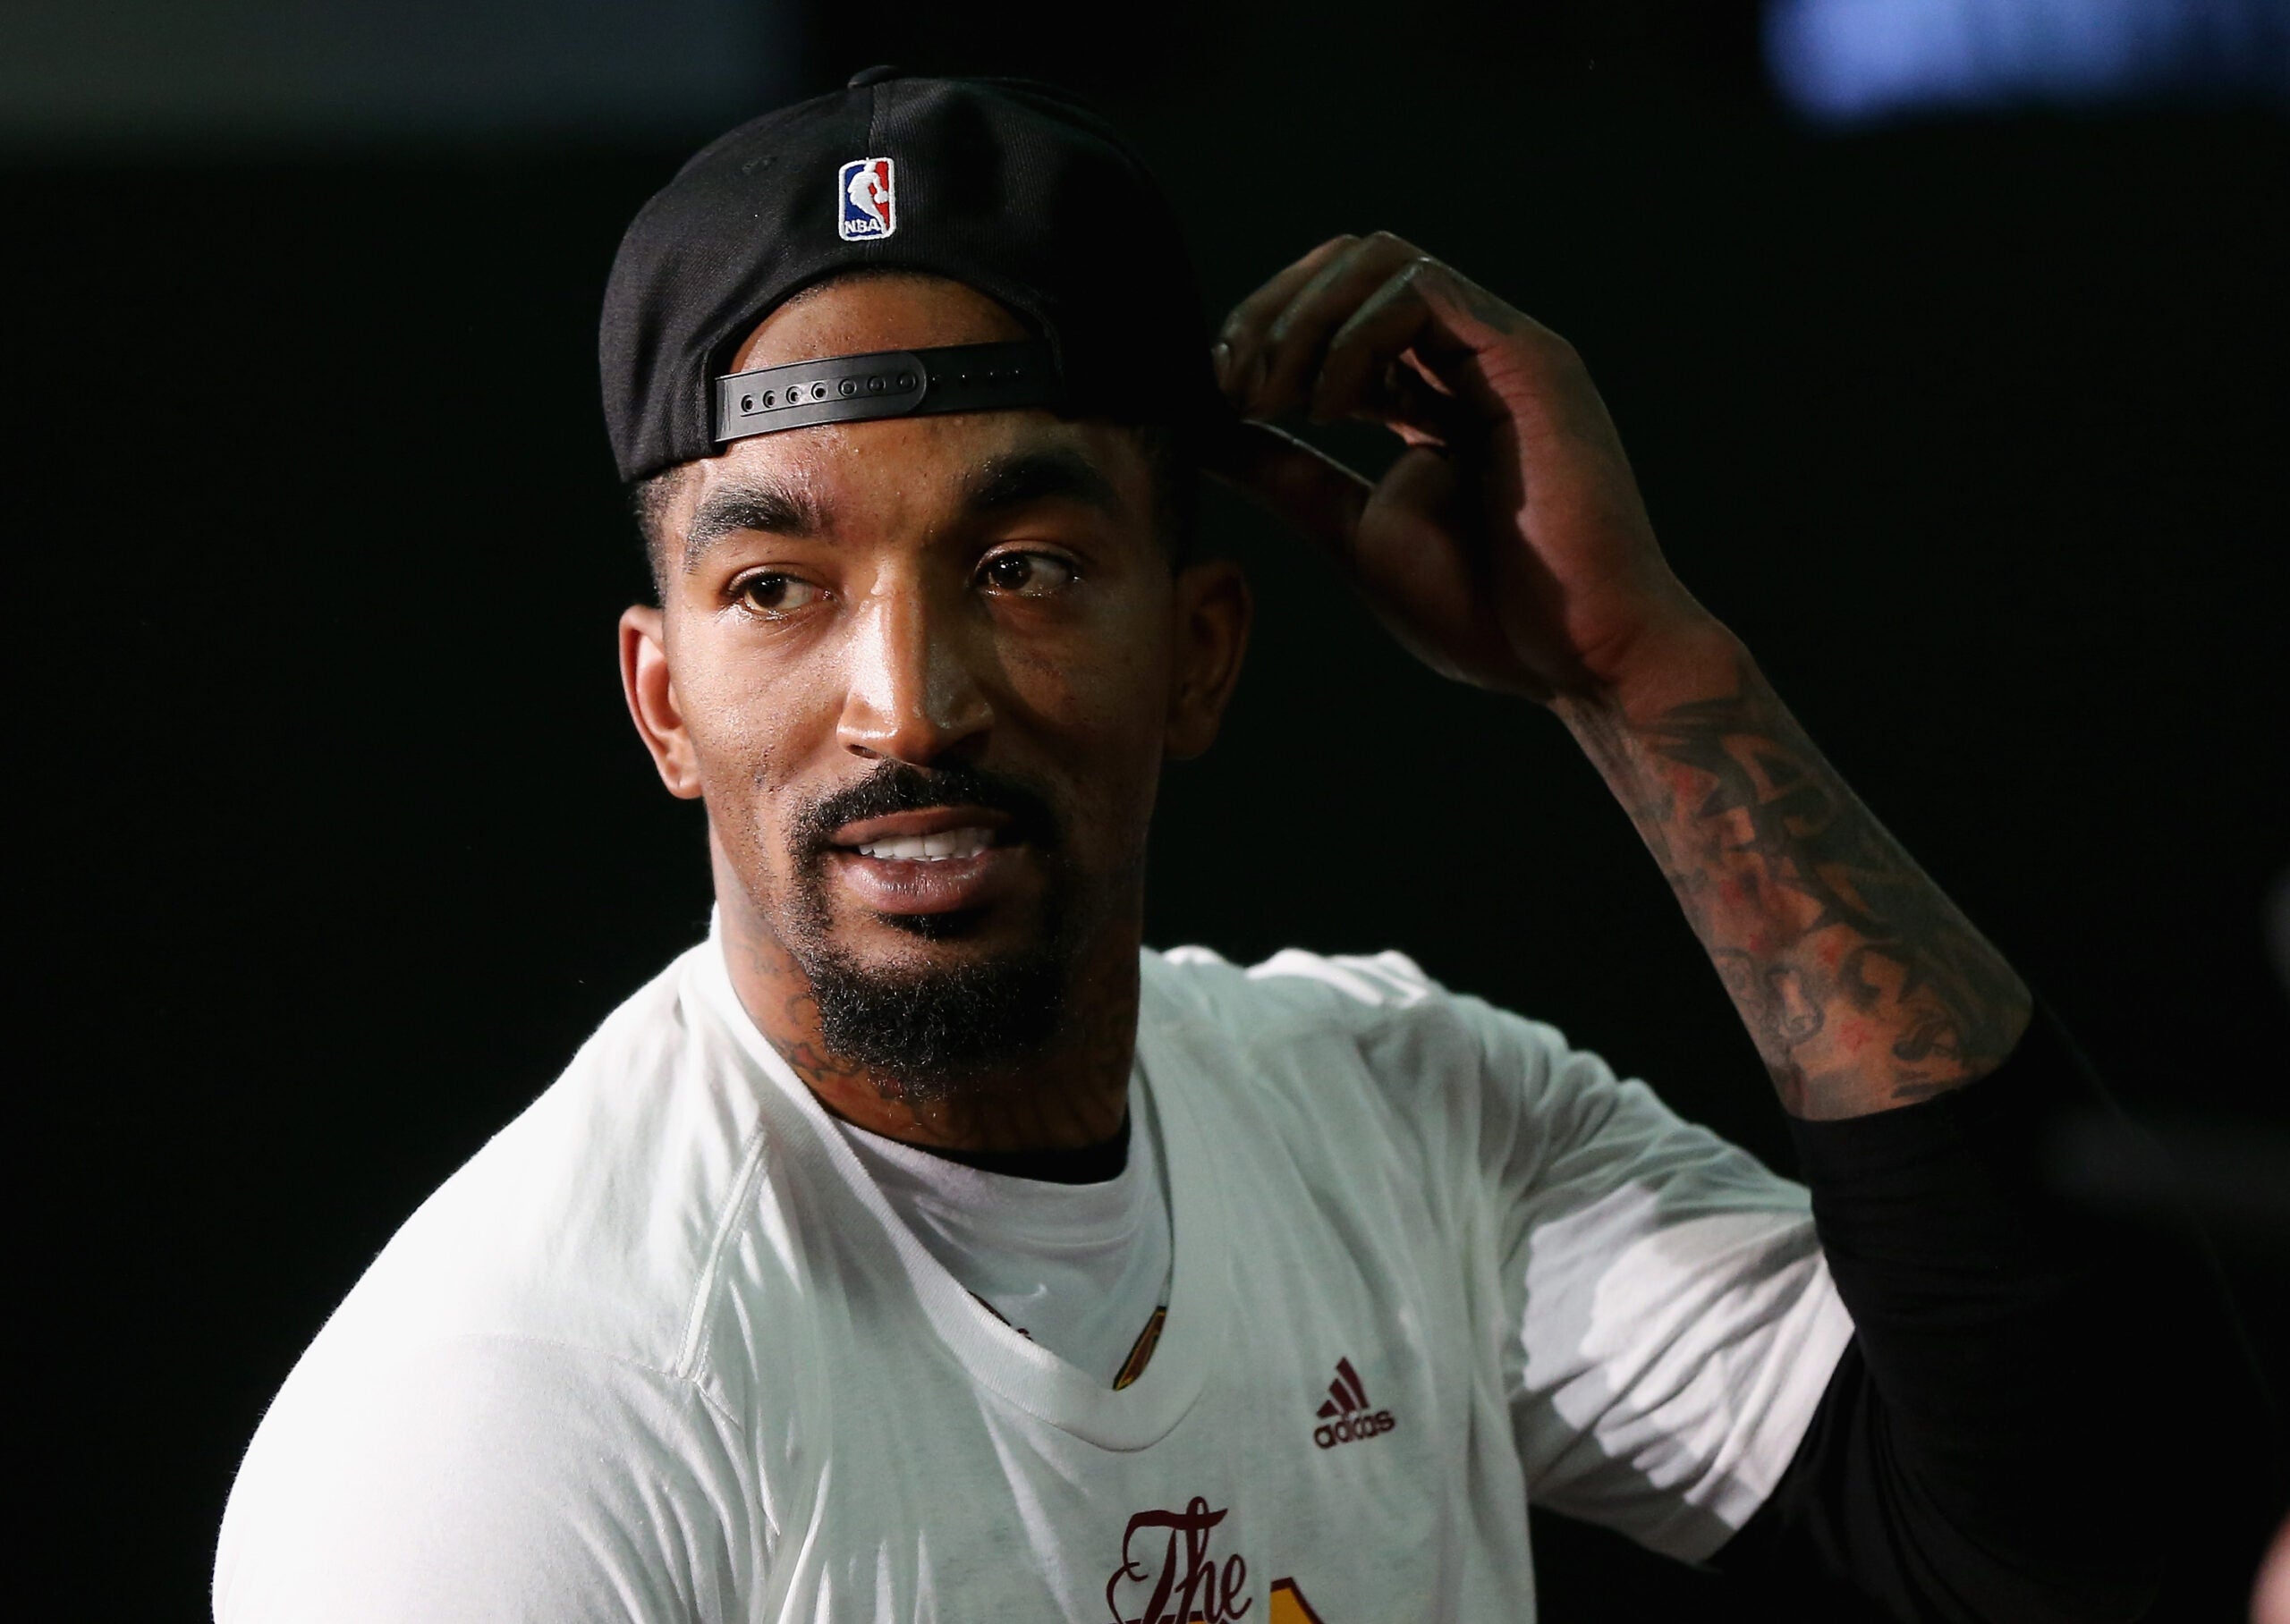 J.R. Smith charged with breaking fan's phone in NYC